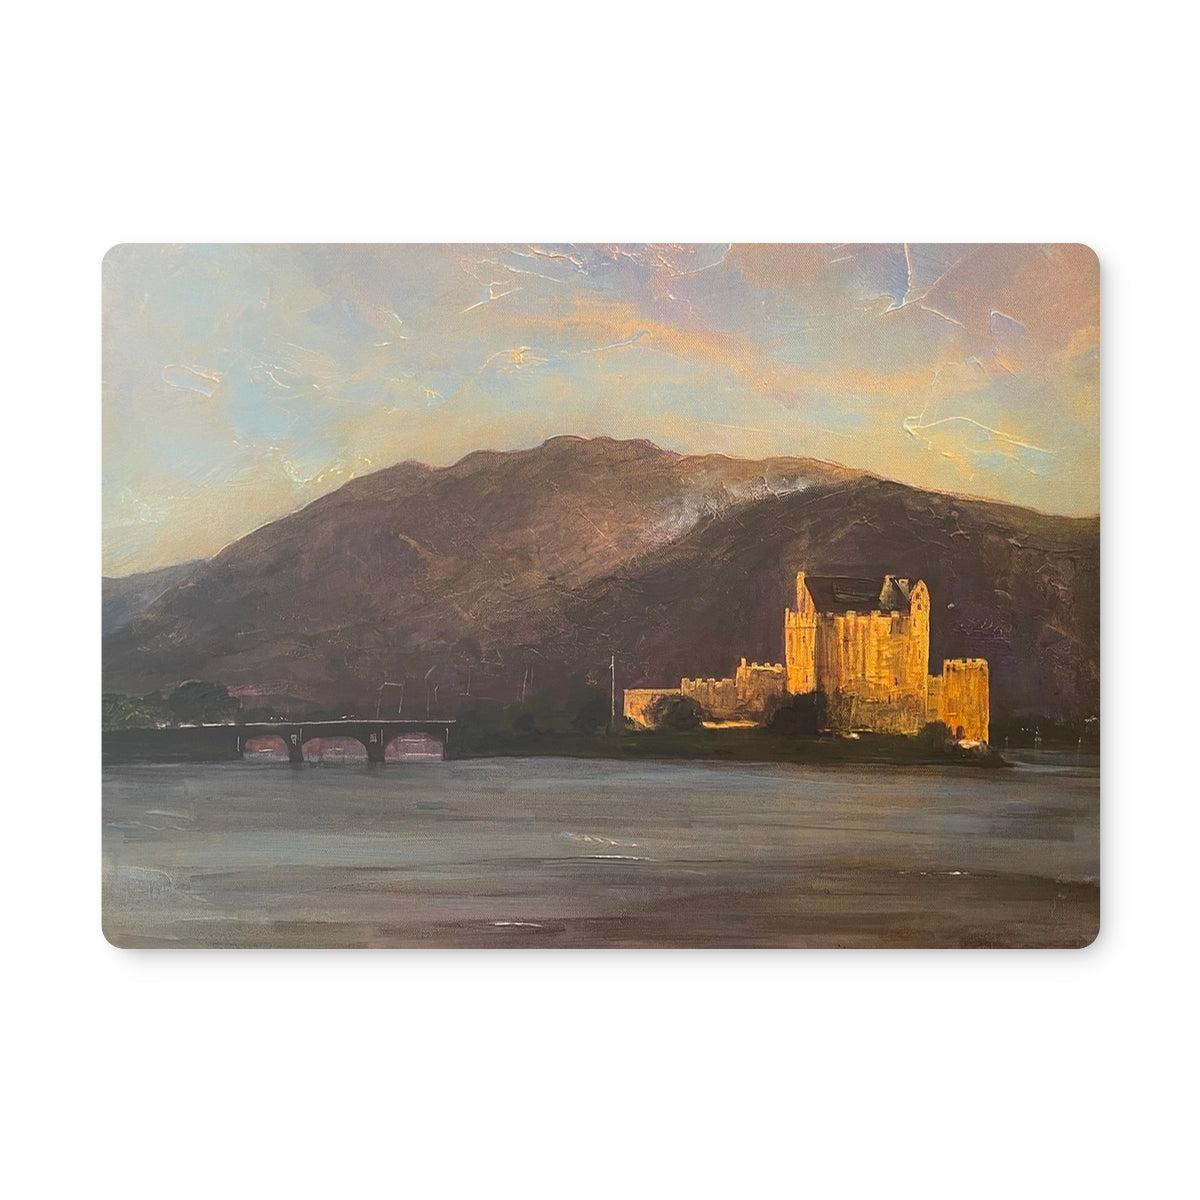 Eilean Donan Castle Art Gifts Placemat-Placemats-Historic & Iconic Scotland Art Gallery-6 Placemats-Paintings, Prints, Homeware, Art Gifts From Scotland By Scottish Artist Kevin Hunter